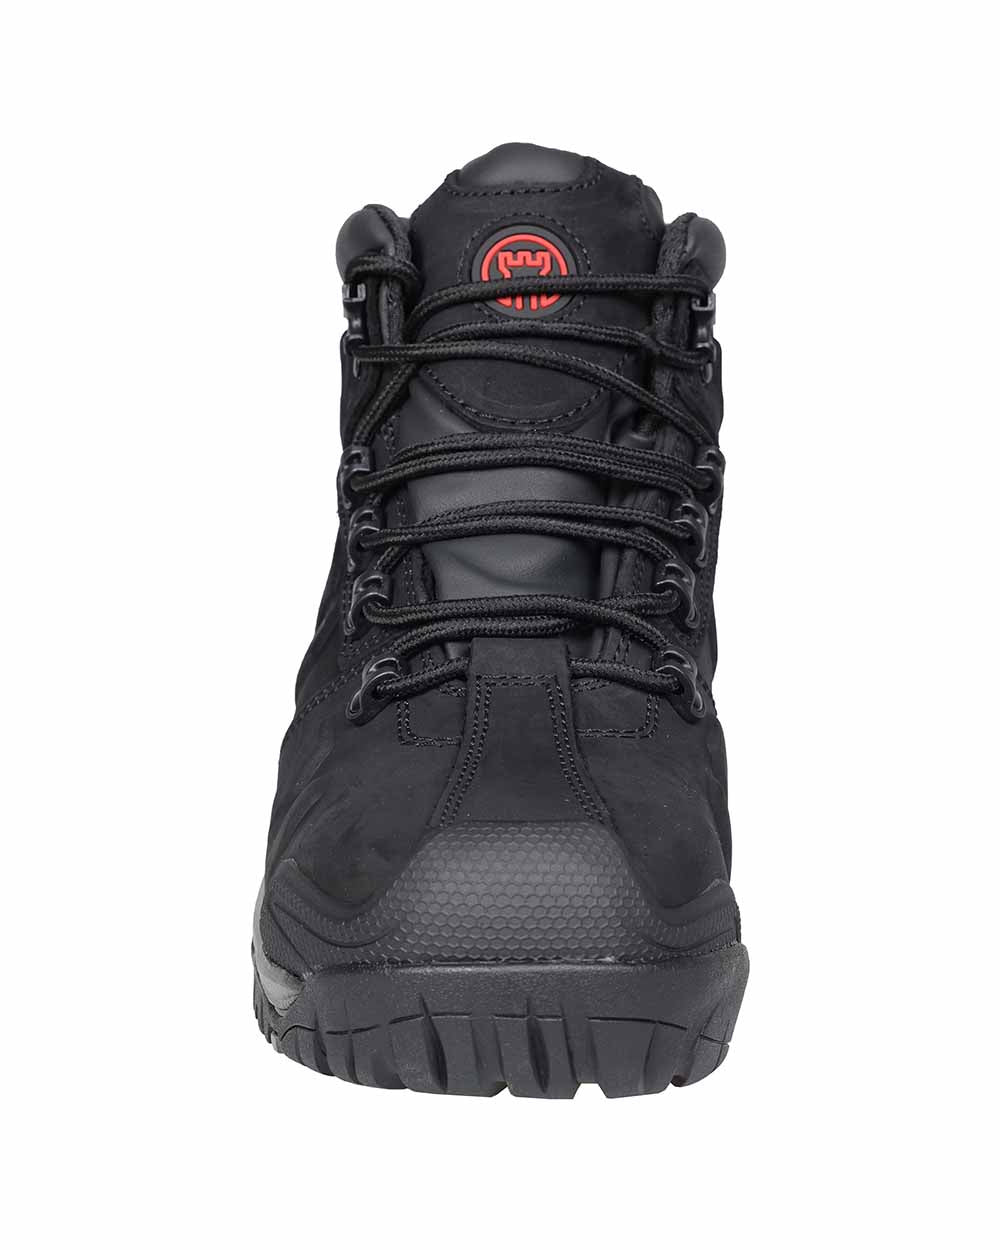 Black Coloured Fort Deben Waterproof Safety Boot On A White Background 